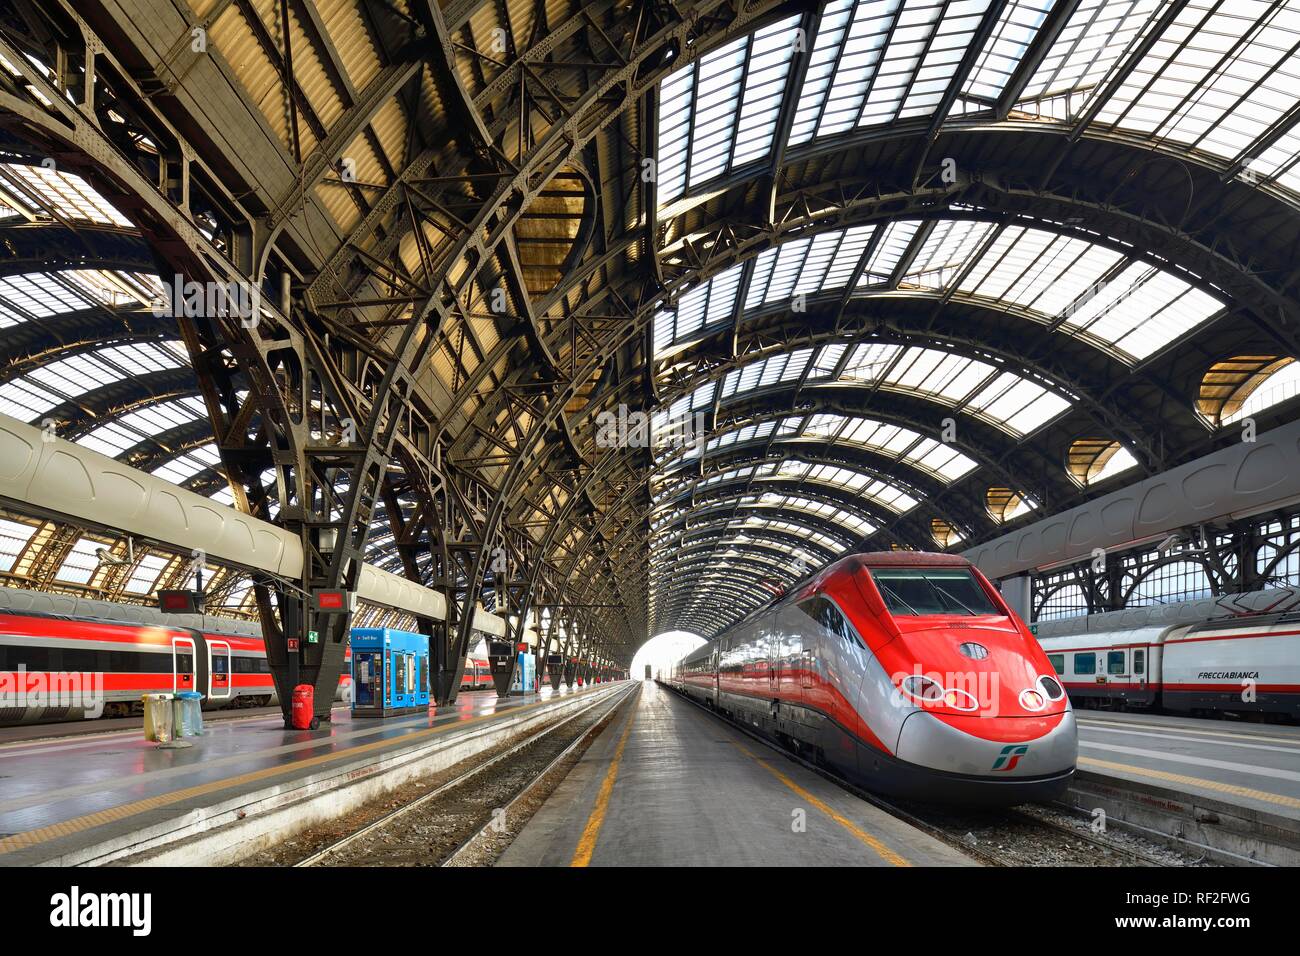 Hall in the central railway station, Stazione Centrale, with Frecciarossa high-speed trains, Milan, Lombardy, Italy Stock Photo